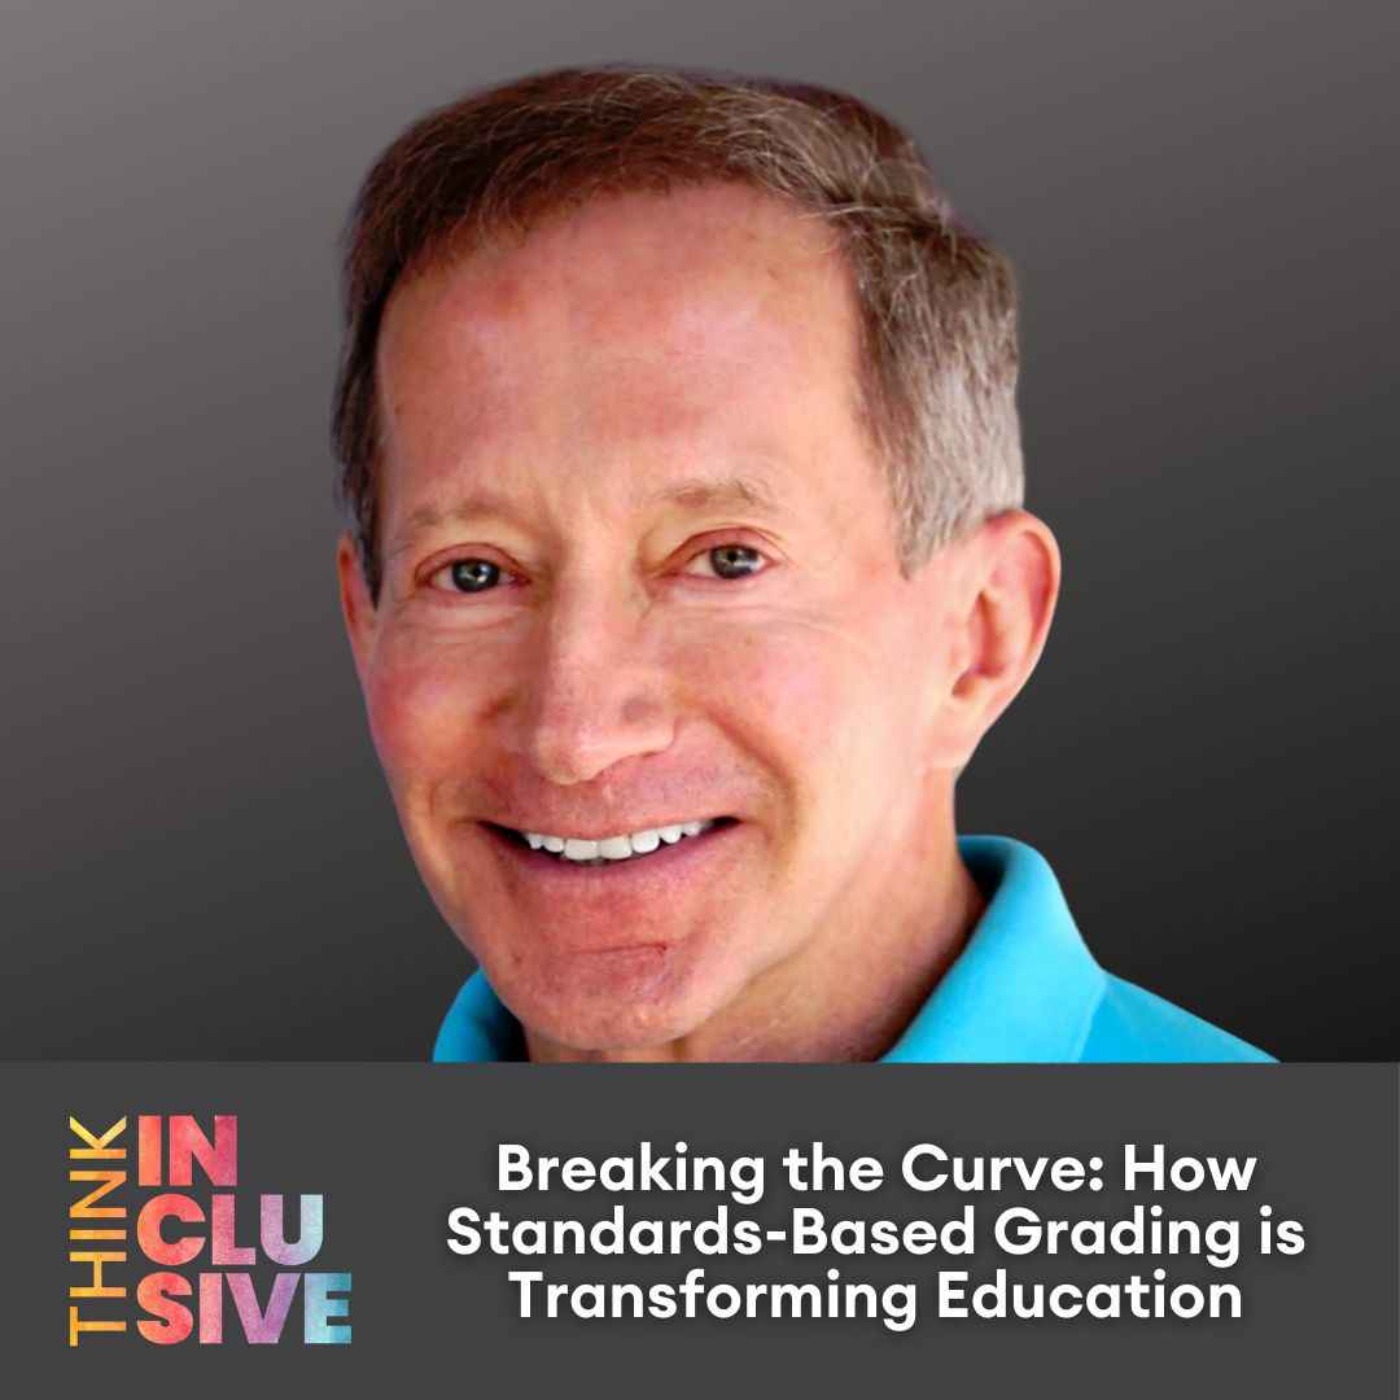 Breaking the Curve: How Standards-Based Grading is Transforming Education